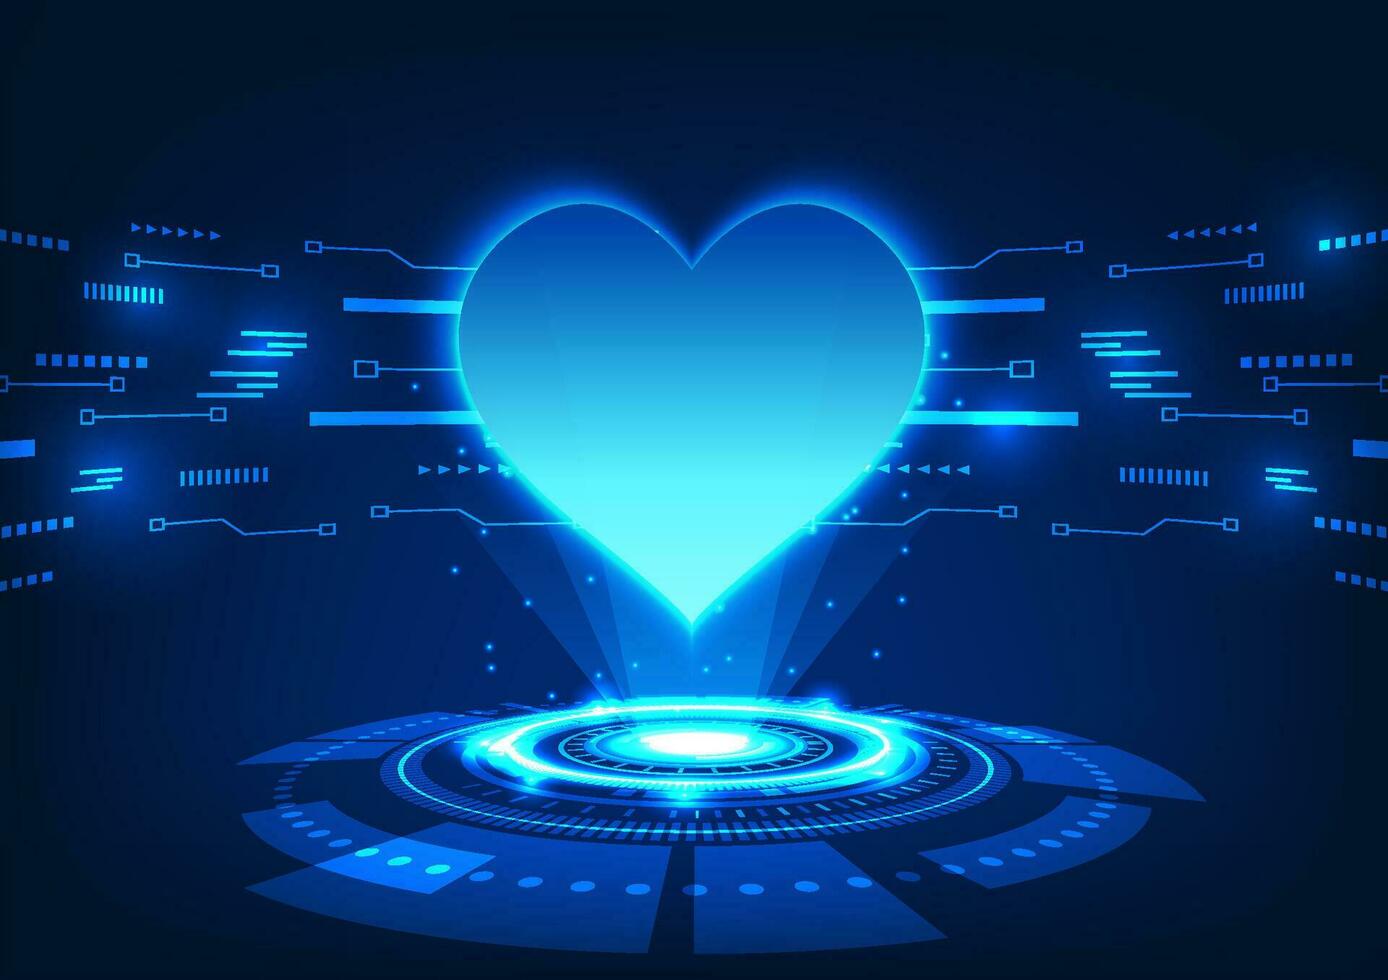 Medical technology that projects a hologram of the heart Technology combined with medicine to reach internal organs for diagnosis and treatment. The heart is placed on a technology circle vector